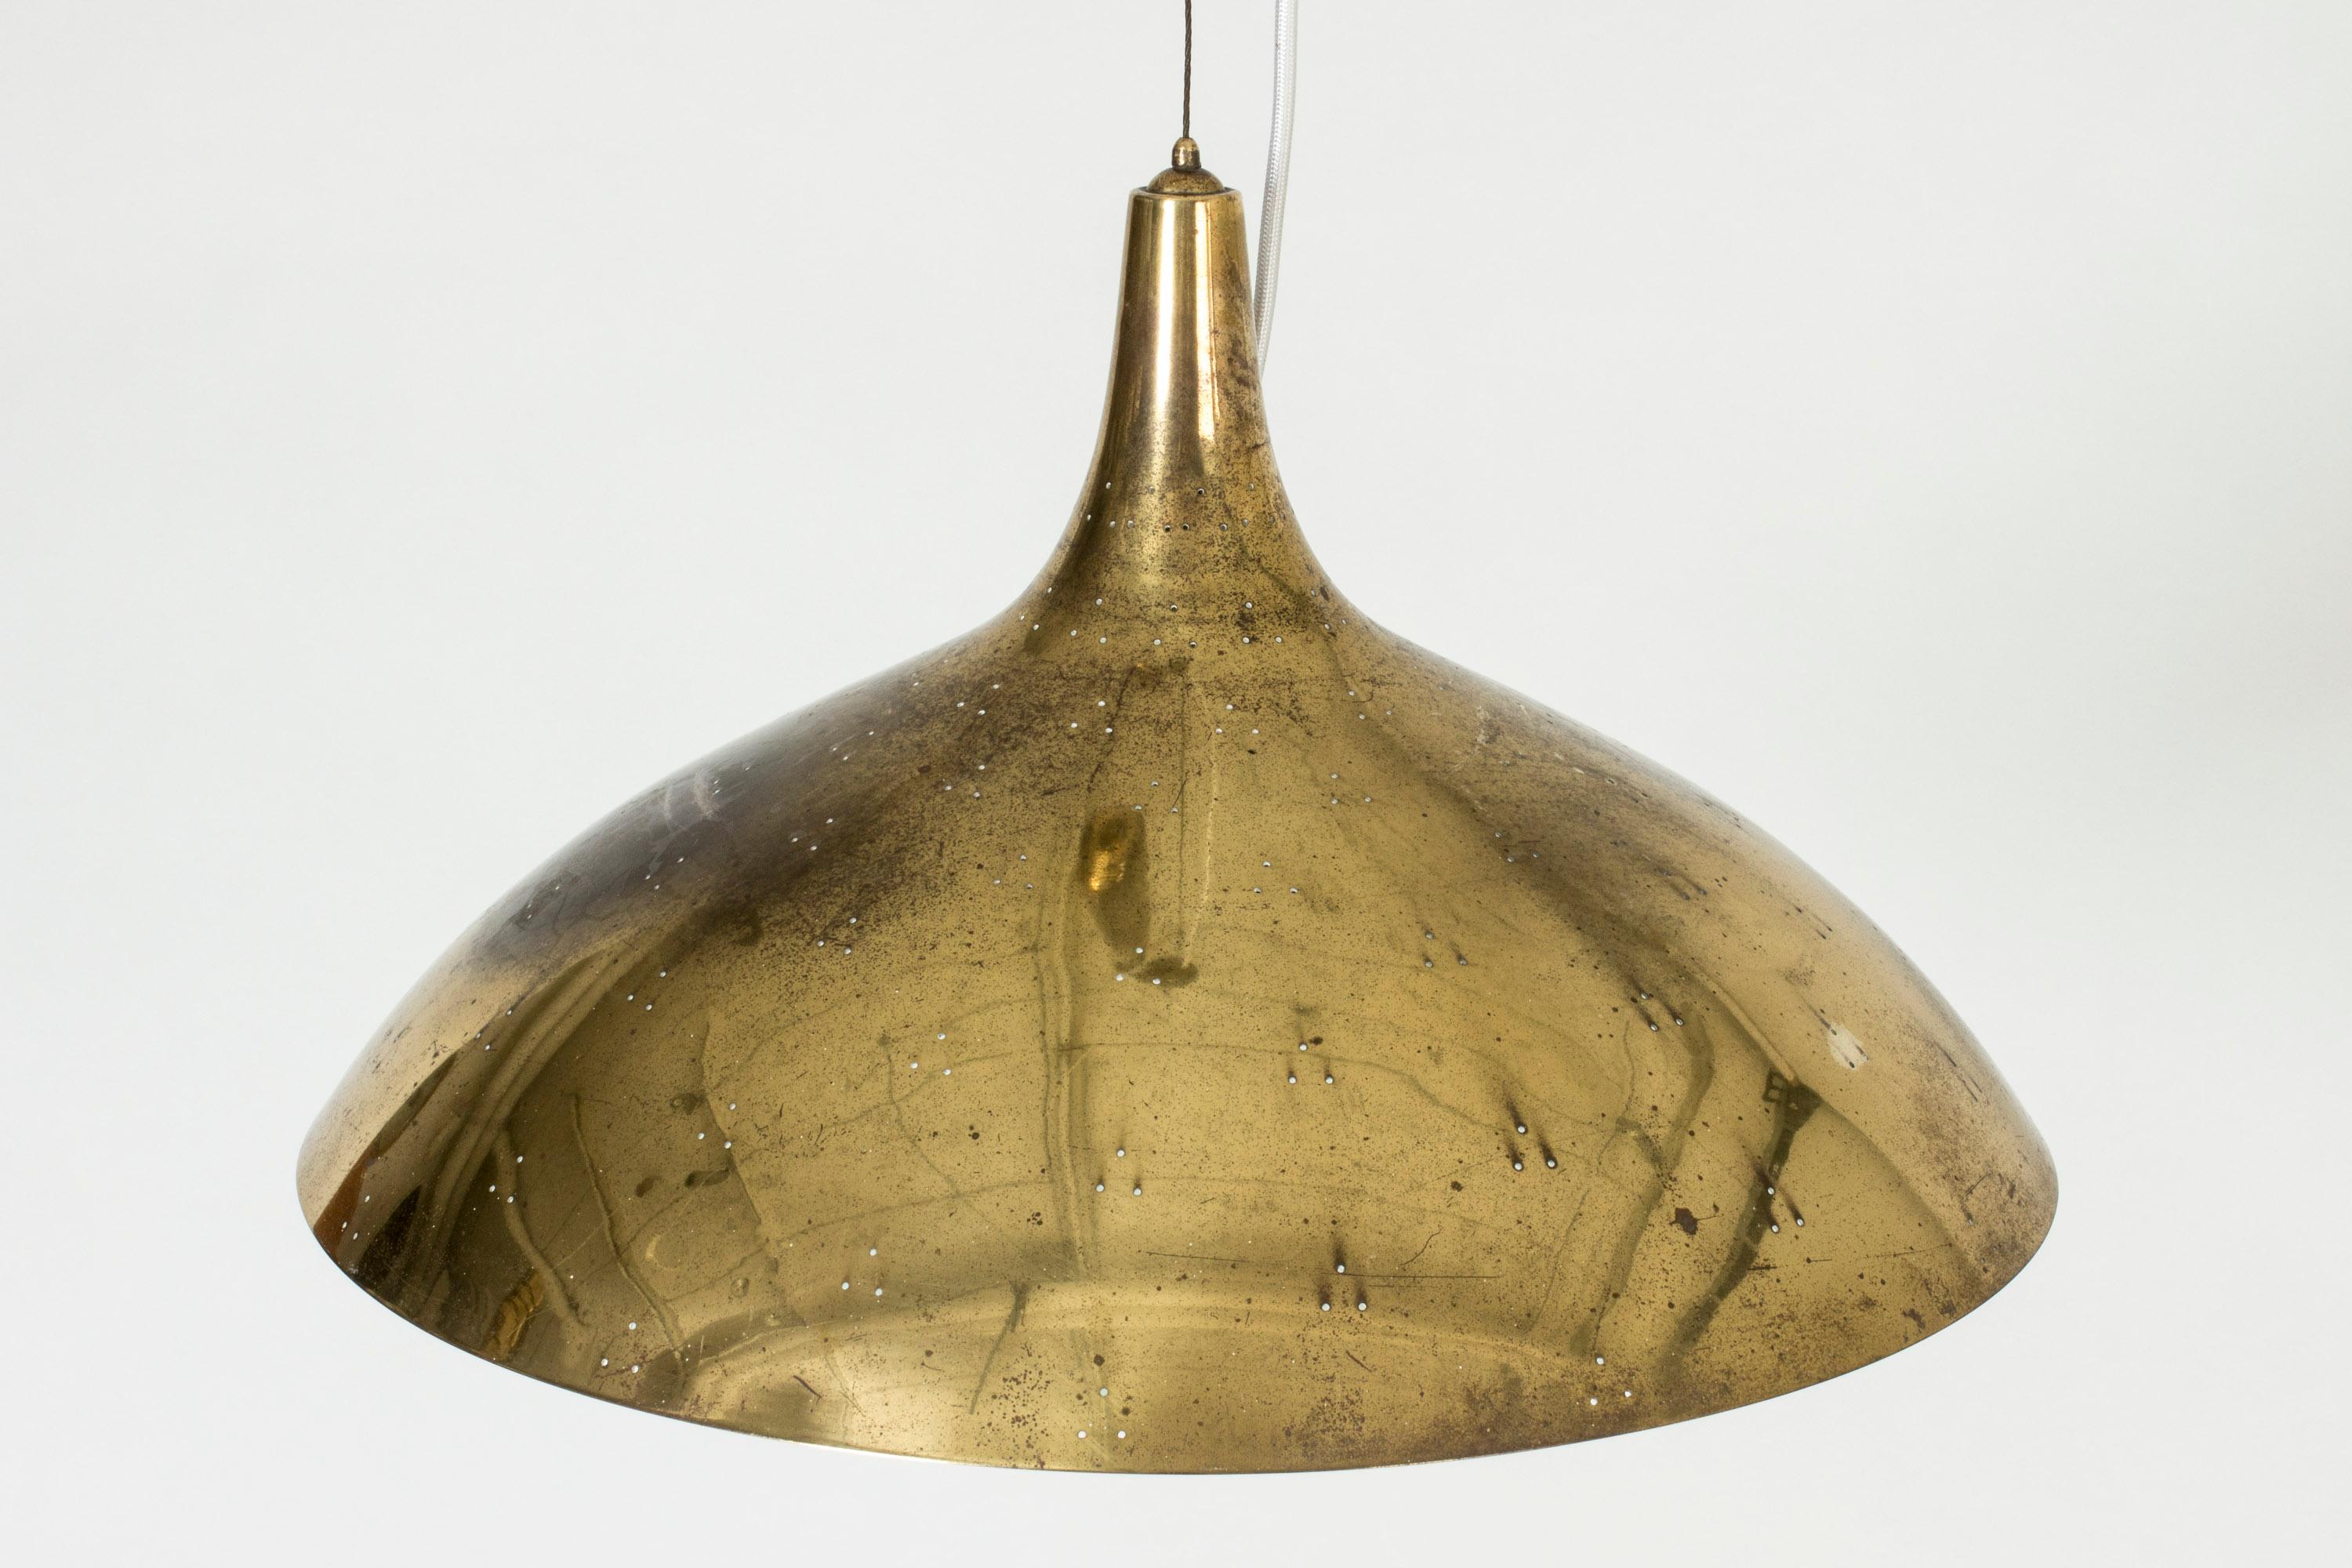 Scandinavian Modern Midcentury Pendant Lamp by Paavo Tynell for Taito Oy, Finland, 1950s